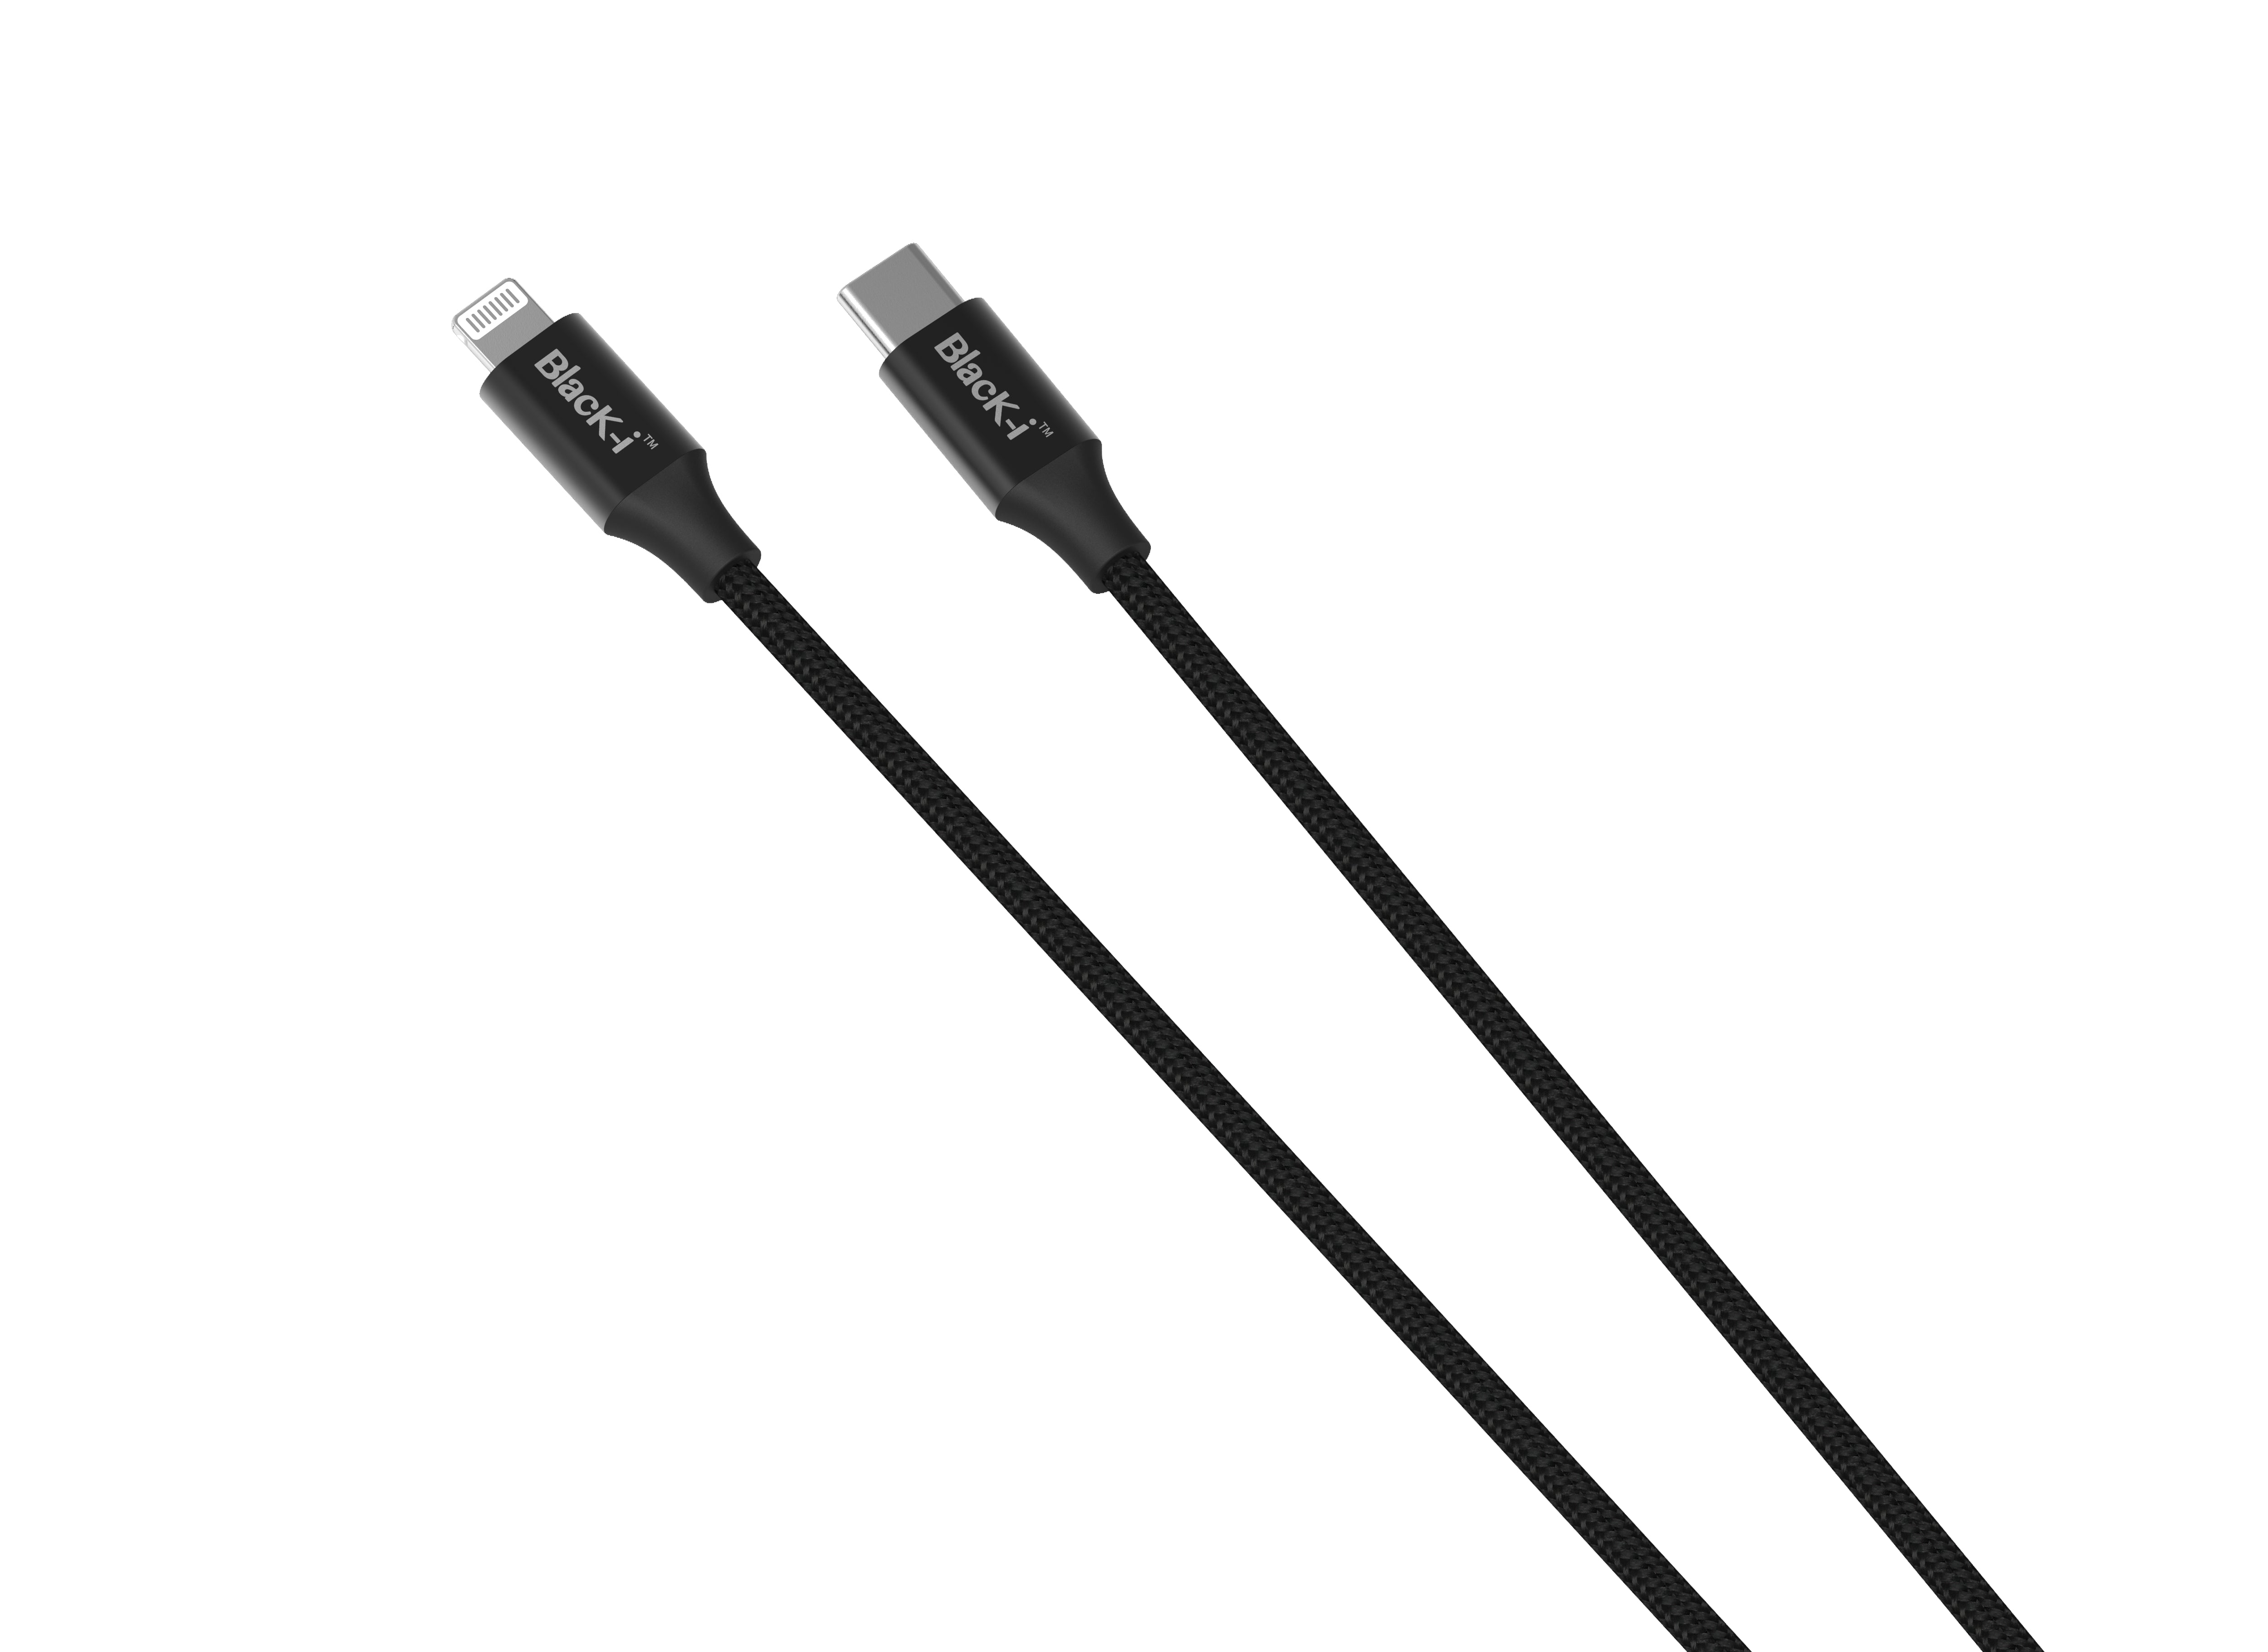 Black-i USB-C to Lightning MFI Certified Cable - 2 Meter Length – Reliable Connectivity for Fast and Certified Data Transfer with Your Apple Devices